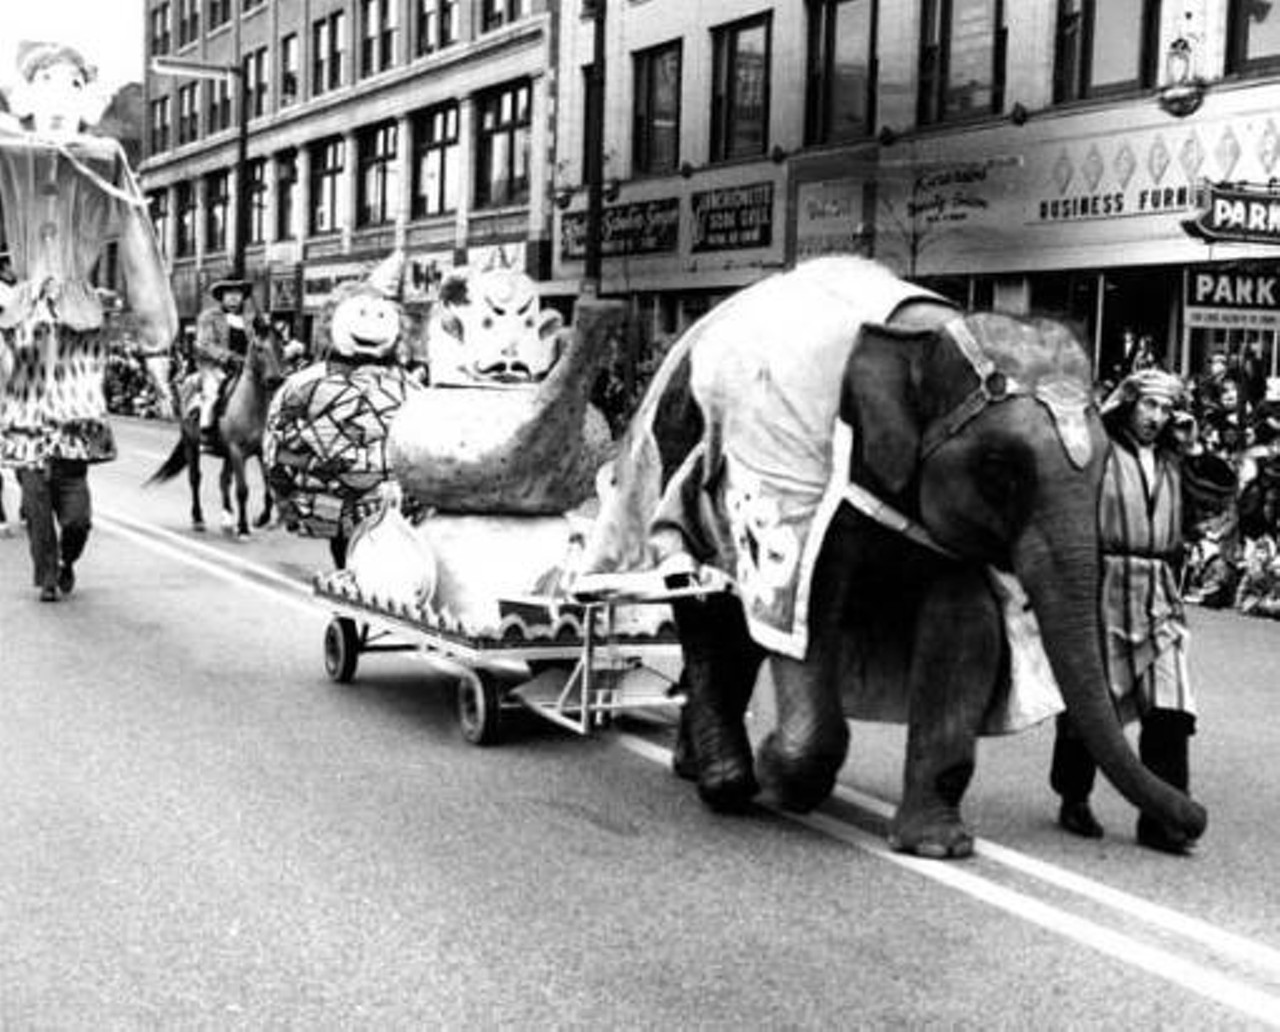 Elephant and floats in Cleveland Christmas parade, 1963.